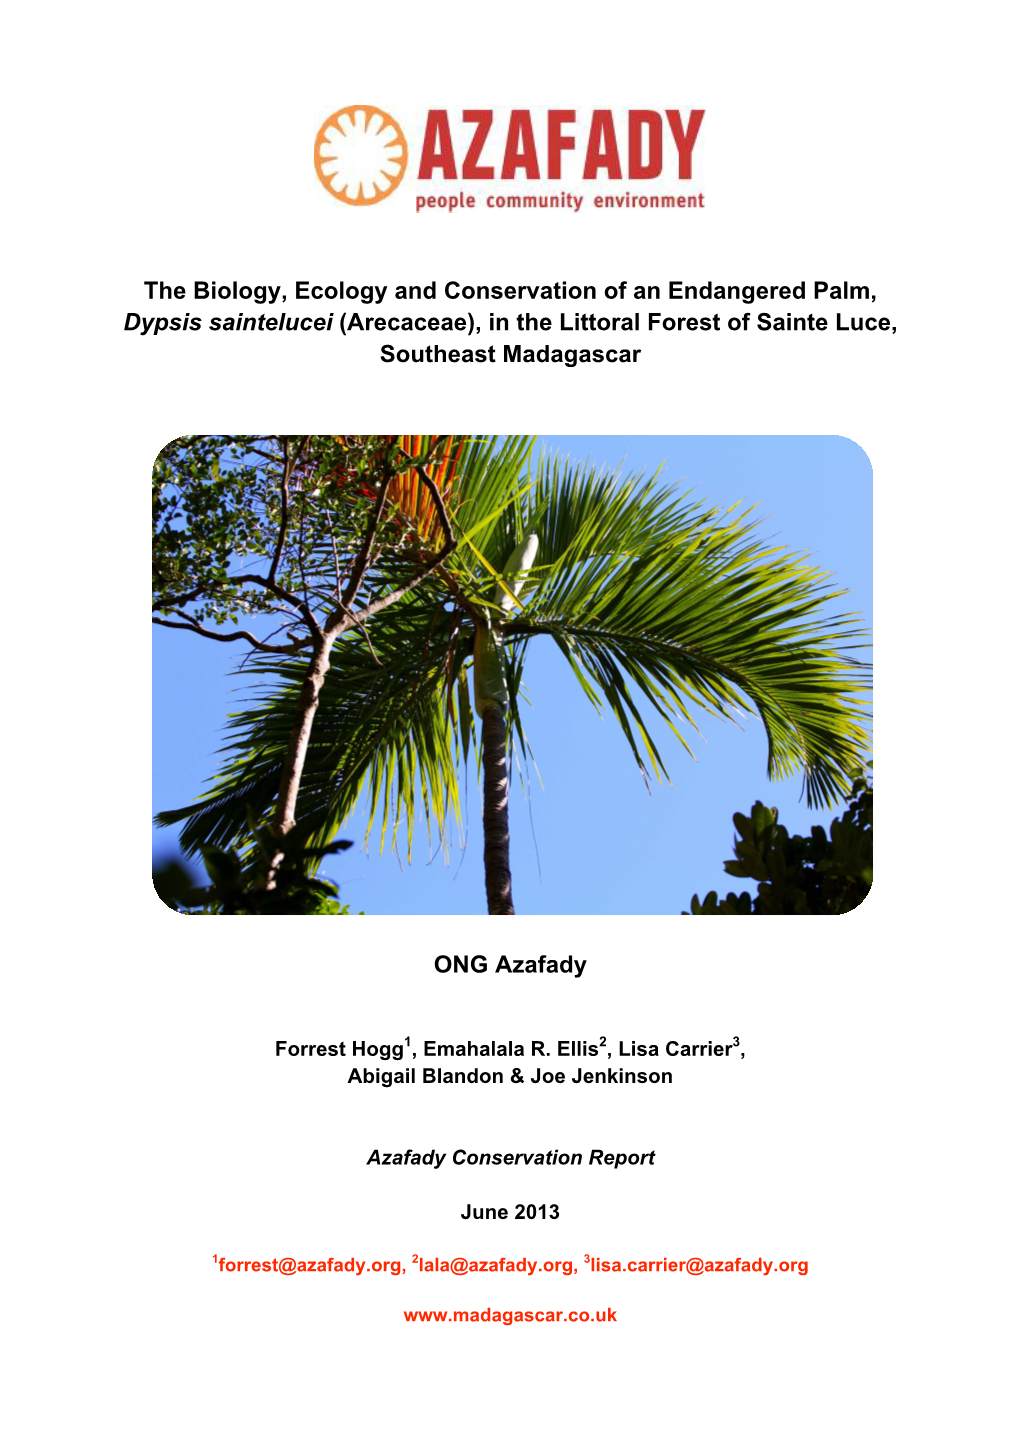 The Biology, Ecology and Conservation of an Endangered Palm, Dypsis Saintelucei (Arecaceae), in the Littoral Forest of Sainte Luce, Southeast Madagascar